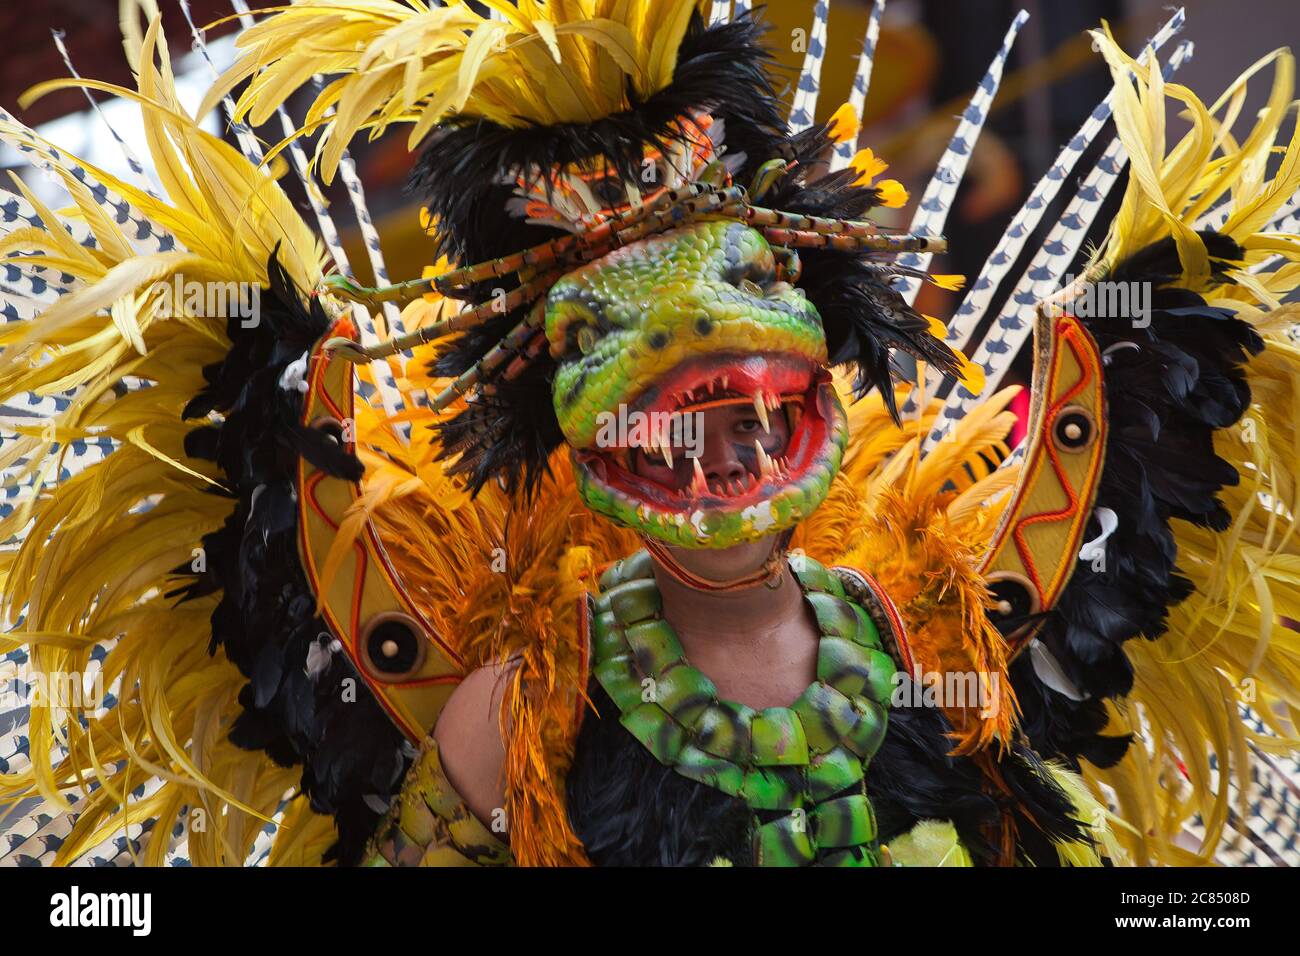 Man in very exotic dress with the head of a fanciful snake in a performance of the Boi Bumba Festival in Parintins, Amazonas State, Brazil Stock Photo